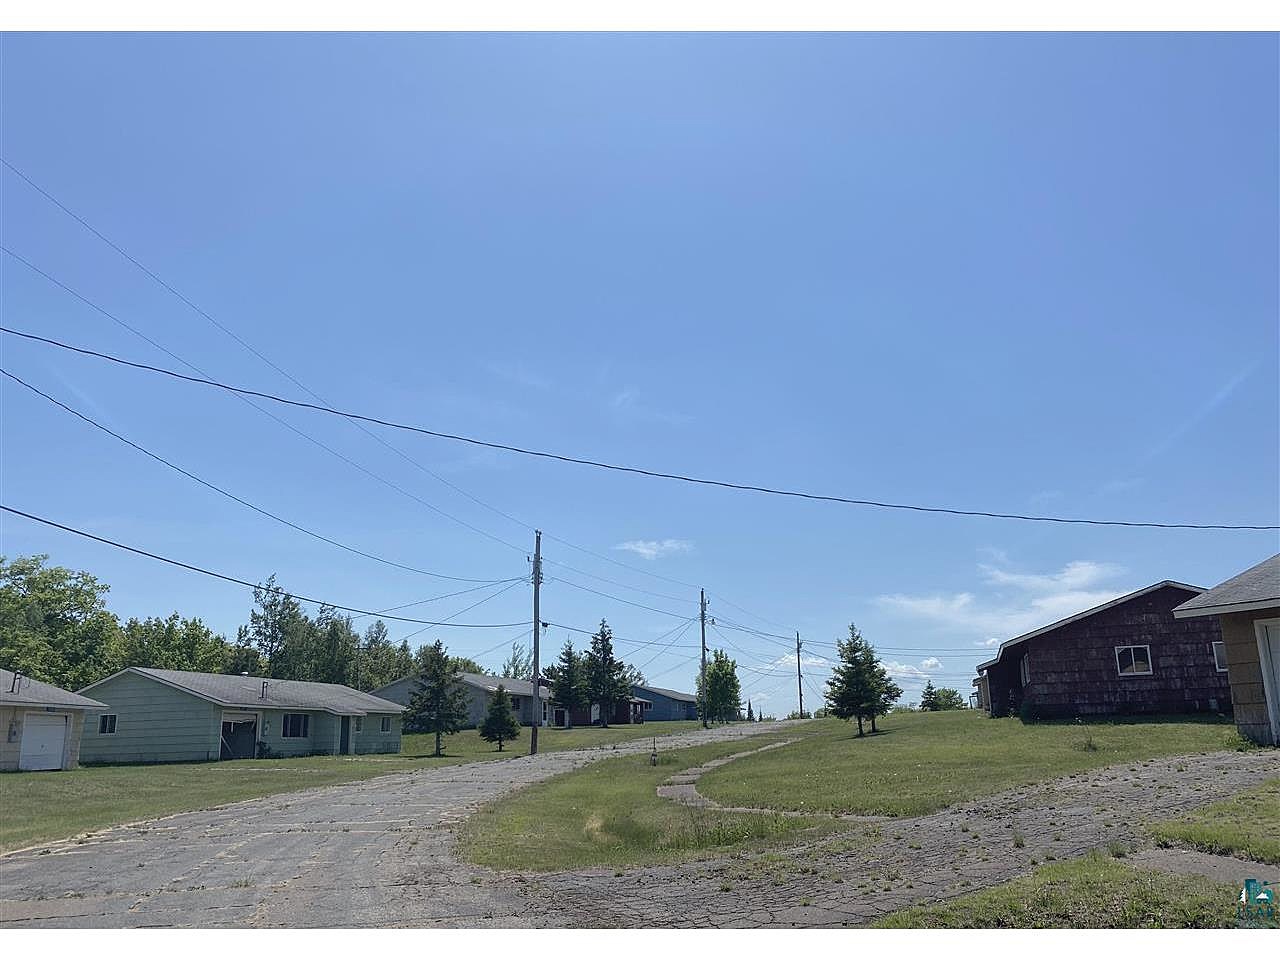 Check Out This Northern Minnesota Ghost Town For Under $1 Million picture